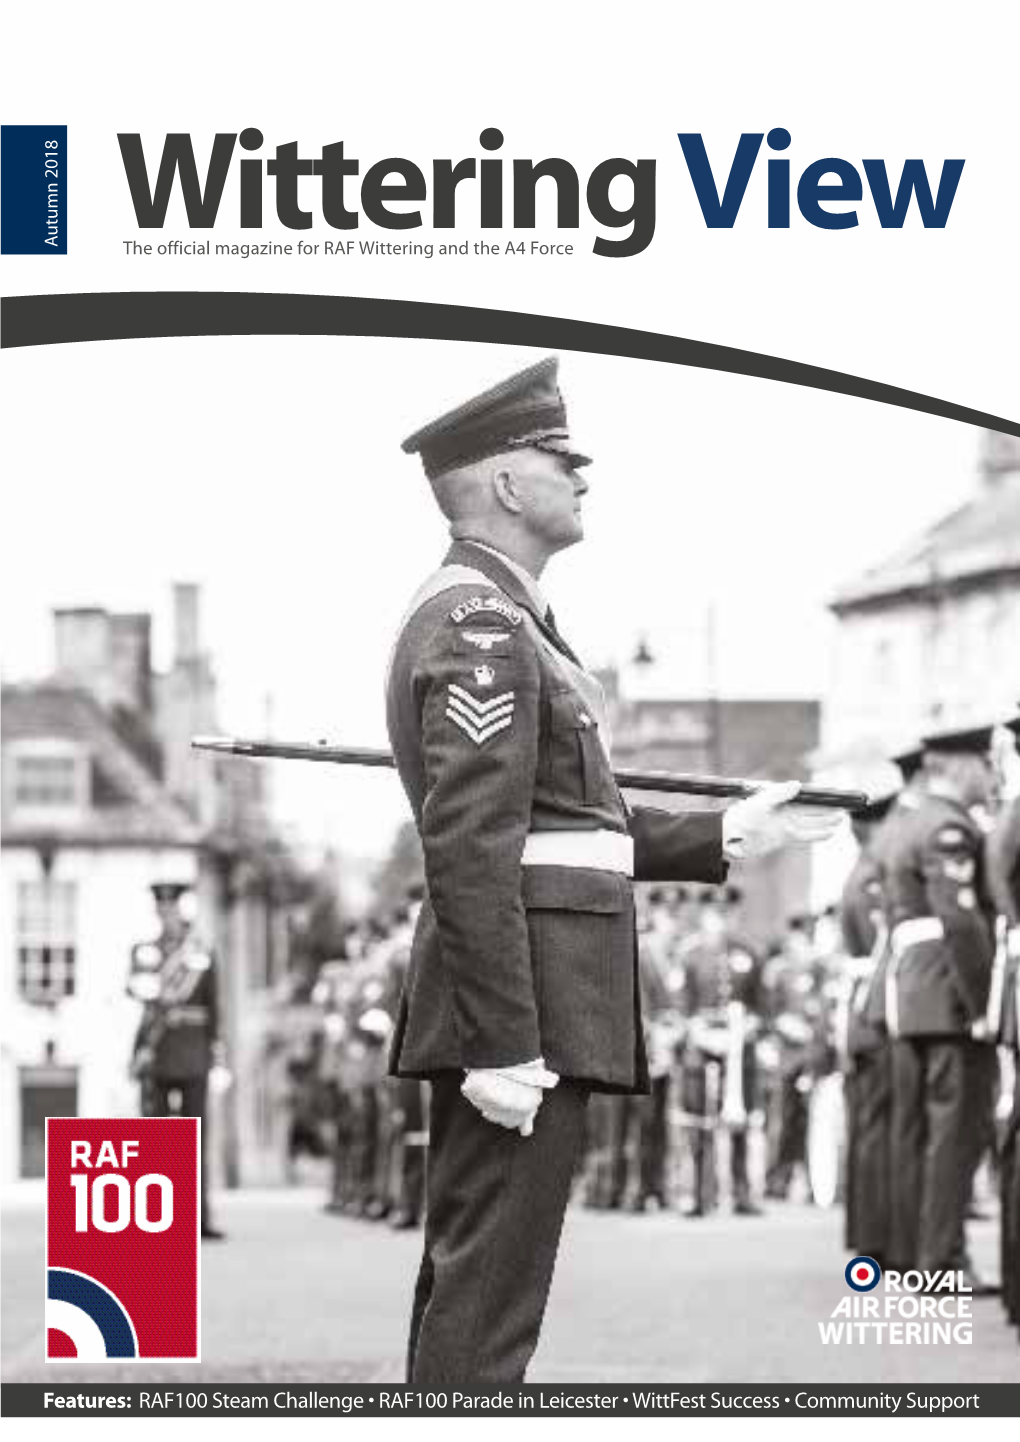 Features: RAF100 Steam Challenge • RAF100 Parade in Leicester • Wittfest Success • Community Support